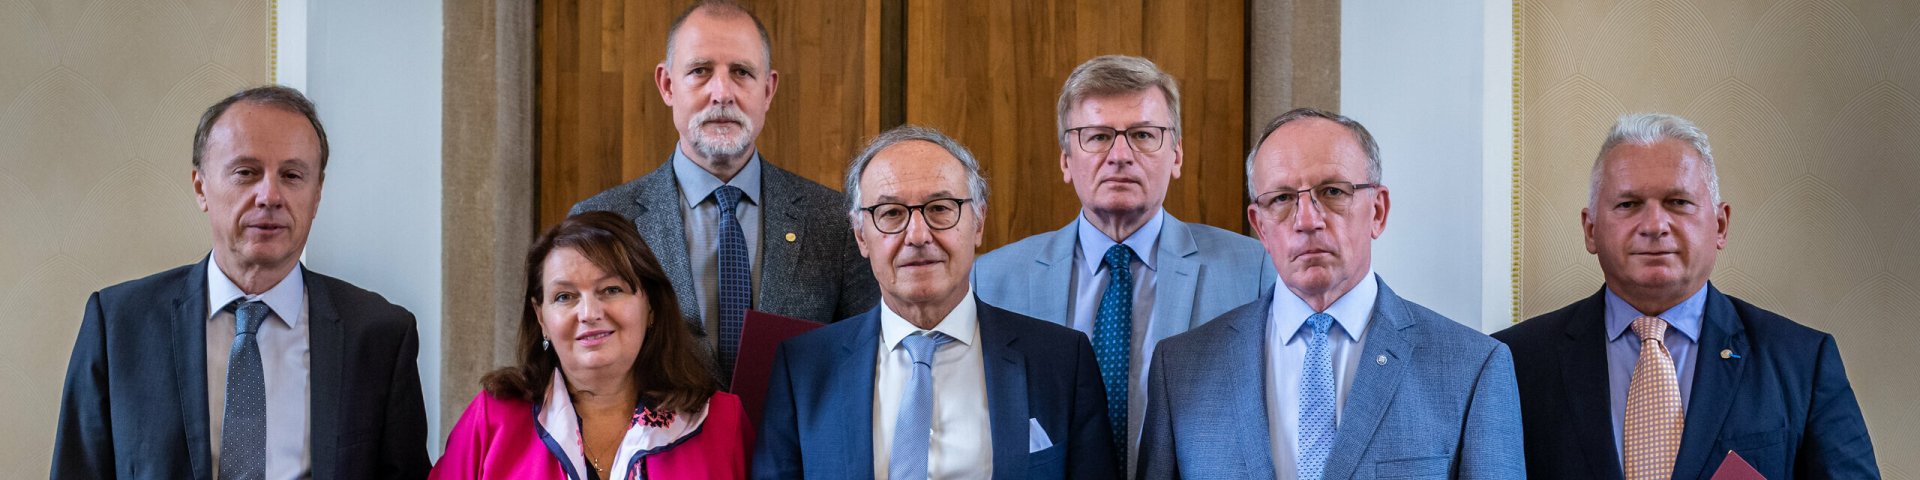 Representatives of CE7 universities with LERU chair Yves Flückiger (centre) at the partnership agreement signing ceremony in Prague on 10 September. Photo: Hynek Glos / LERU